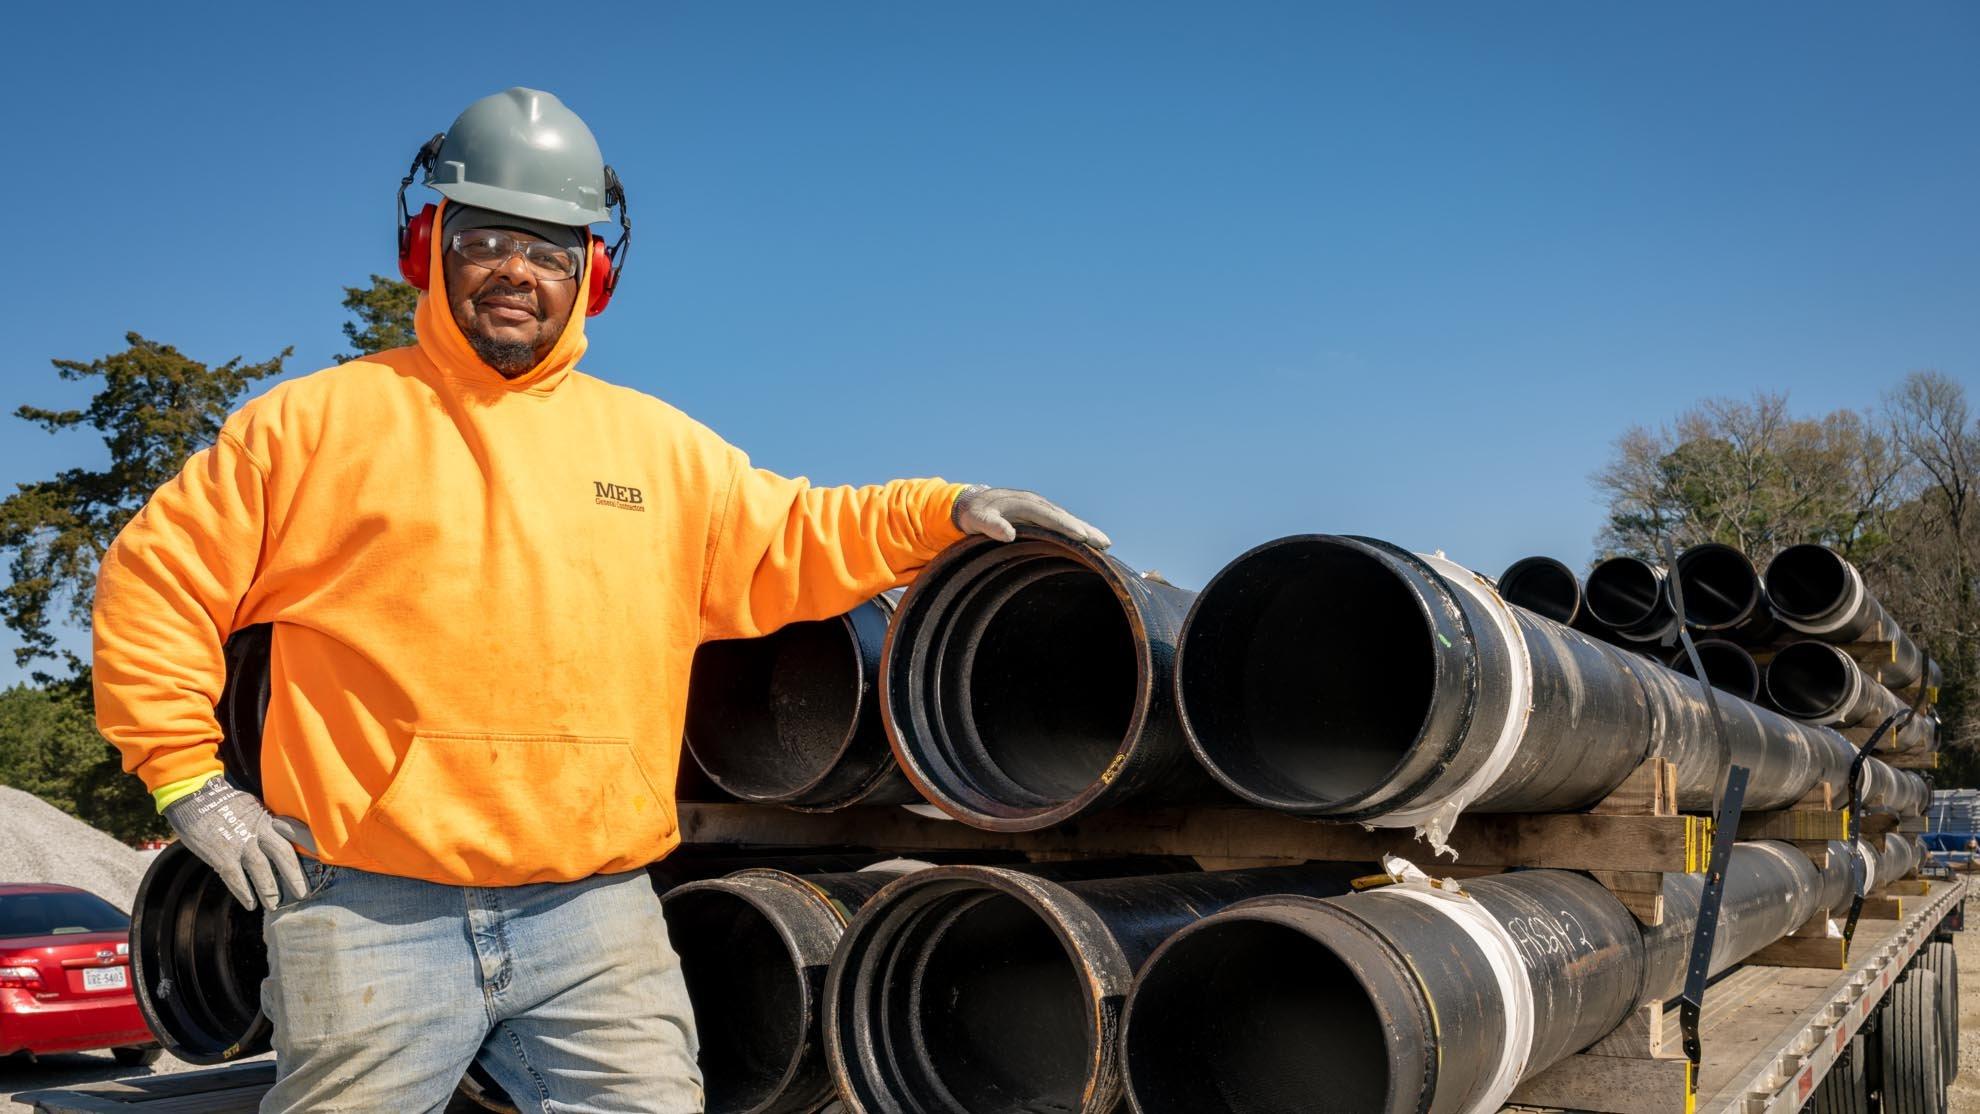 A contractor wearing a hard hat, ear protection and safety glasses stands next to a stack of pipe on a flatbed.